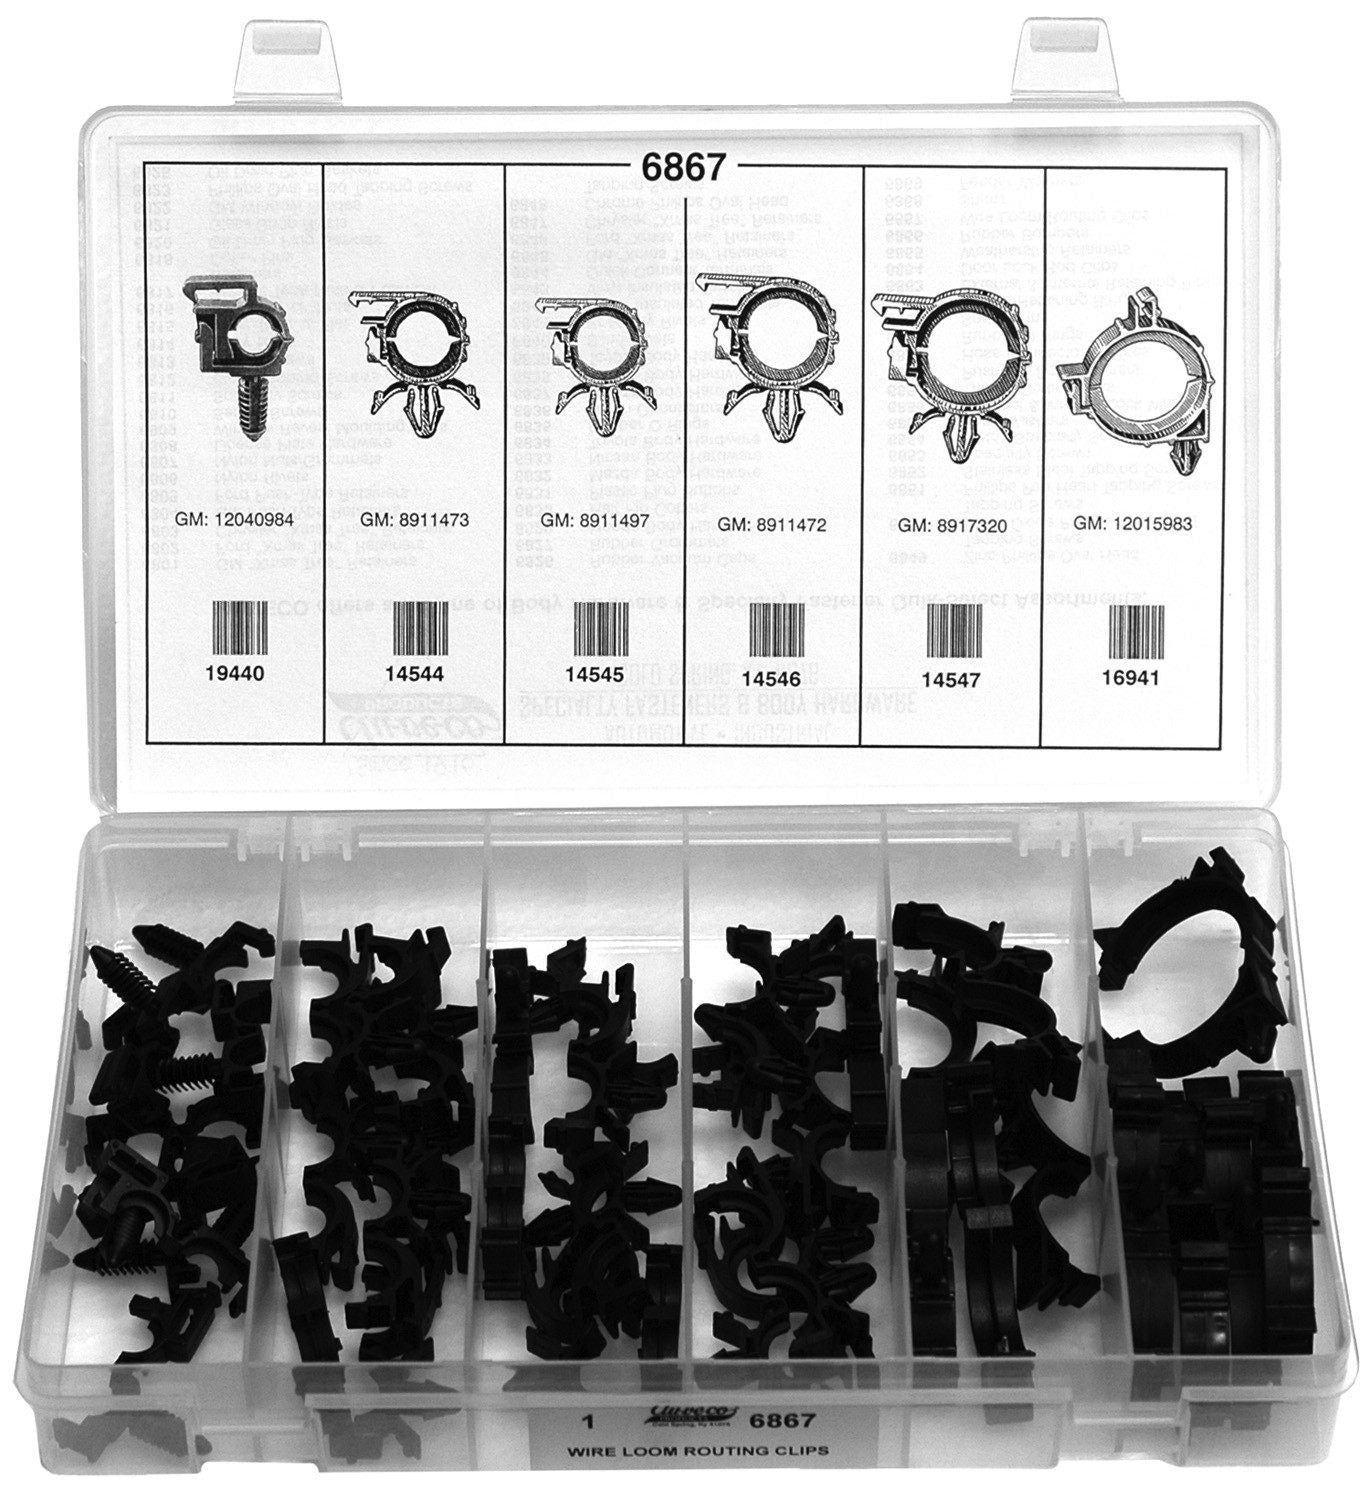 Auveco 6867 Wire Loom Routing Clips Quik-Select Kit Qty 1 